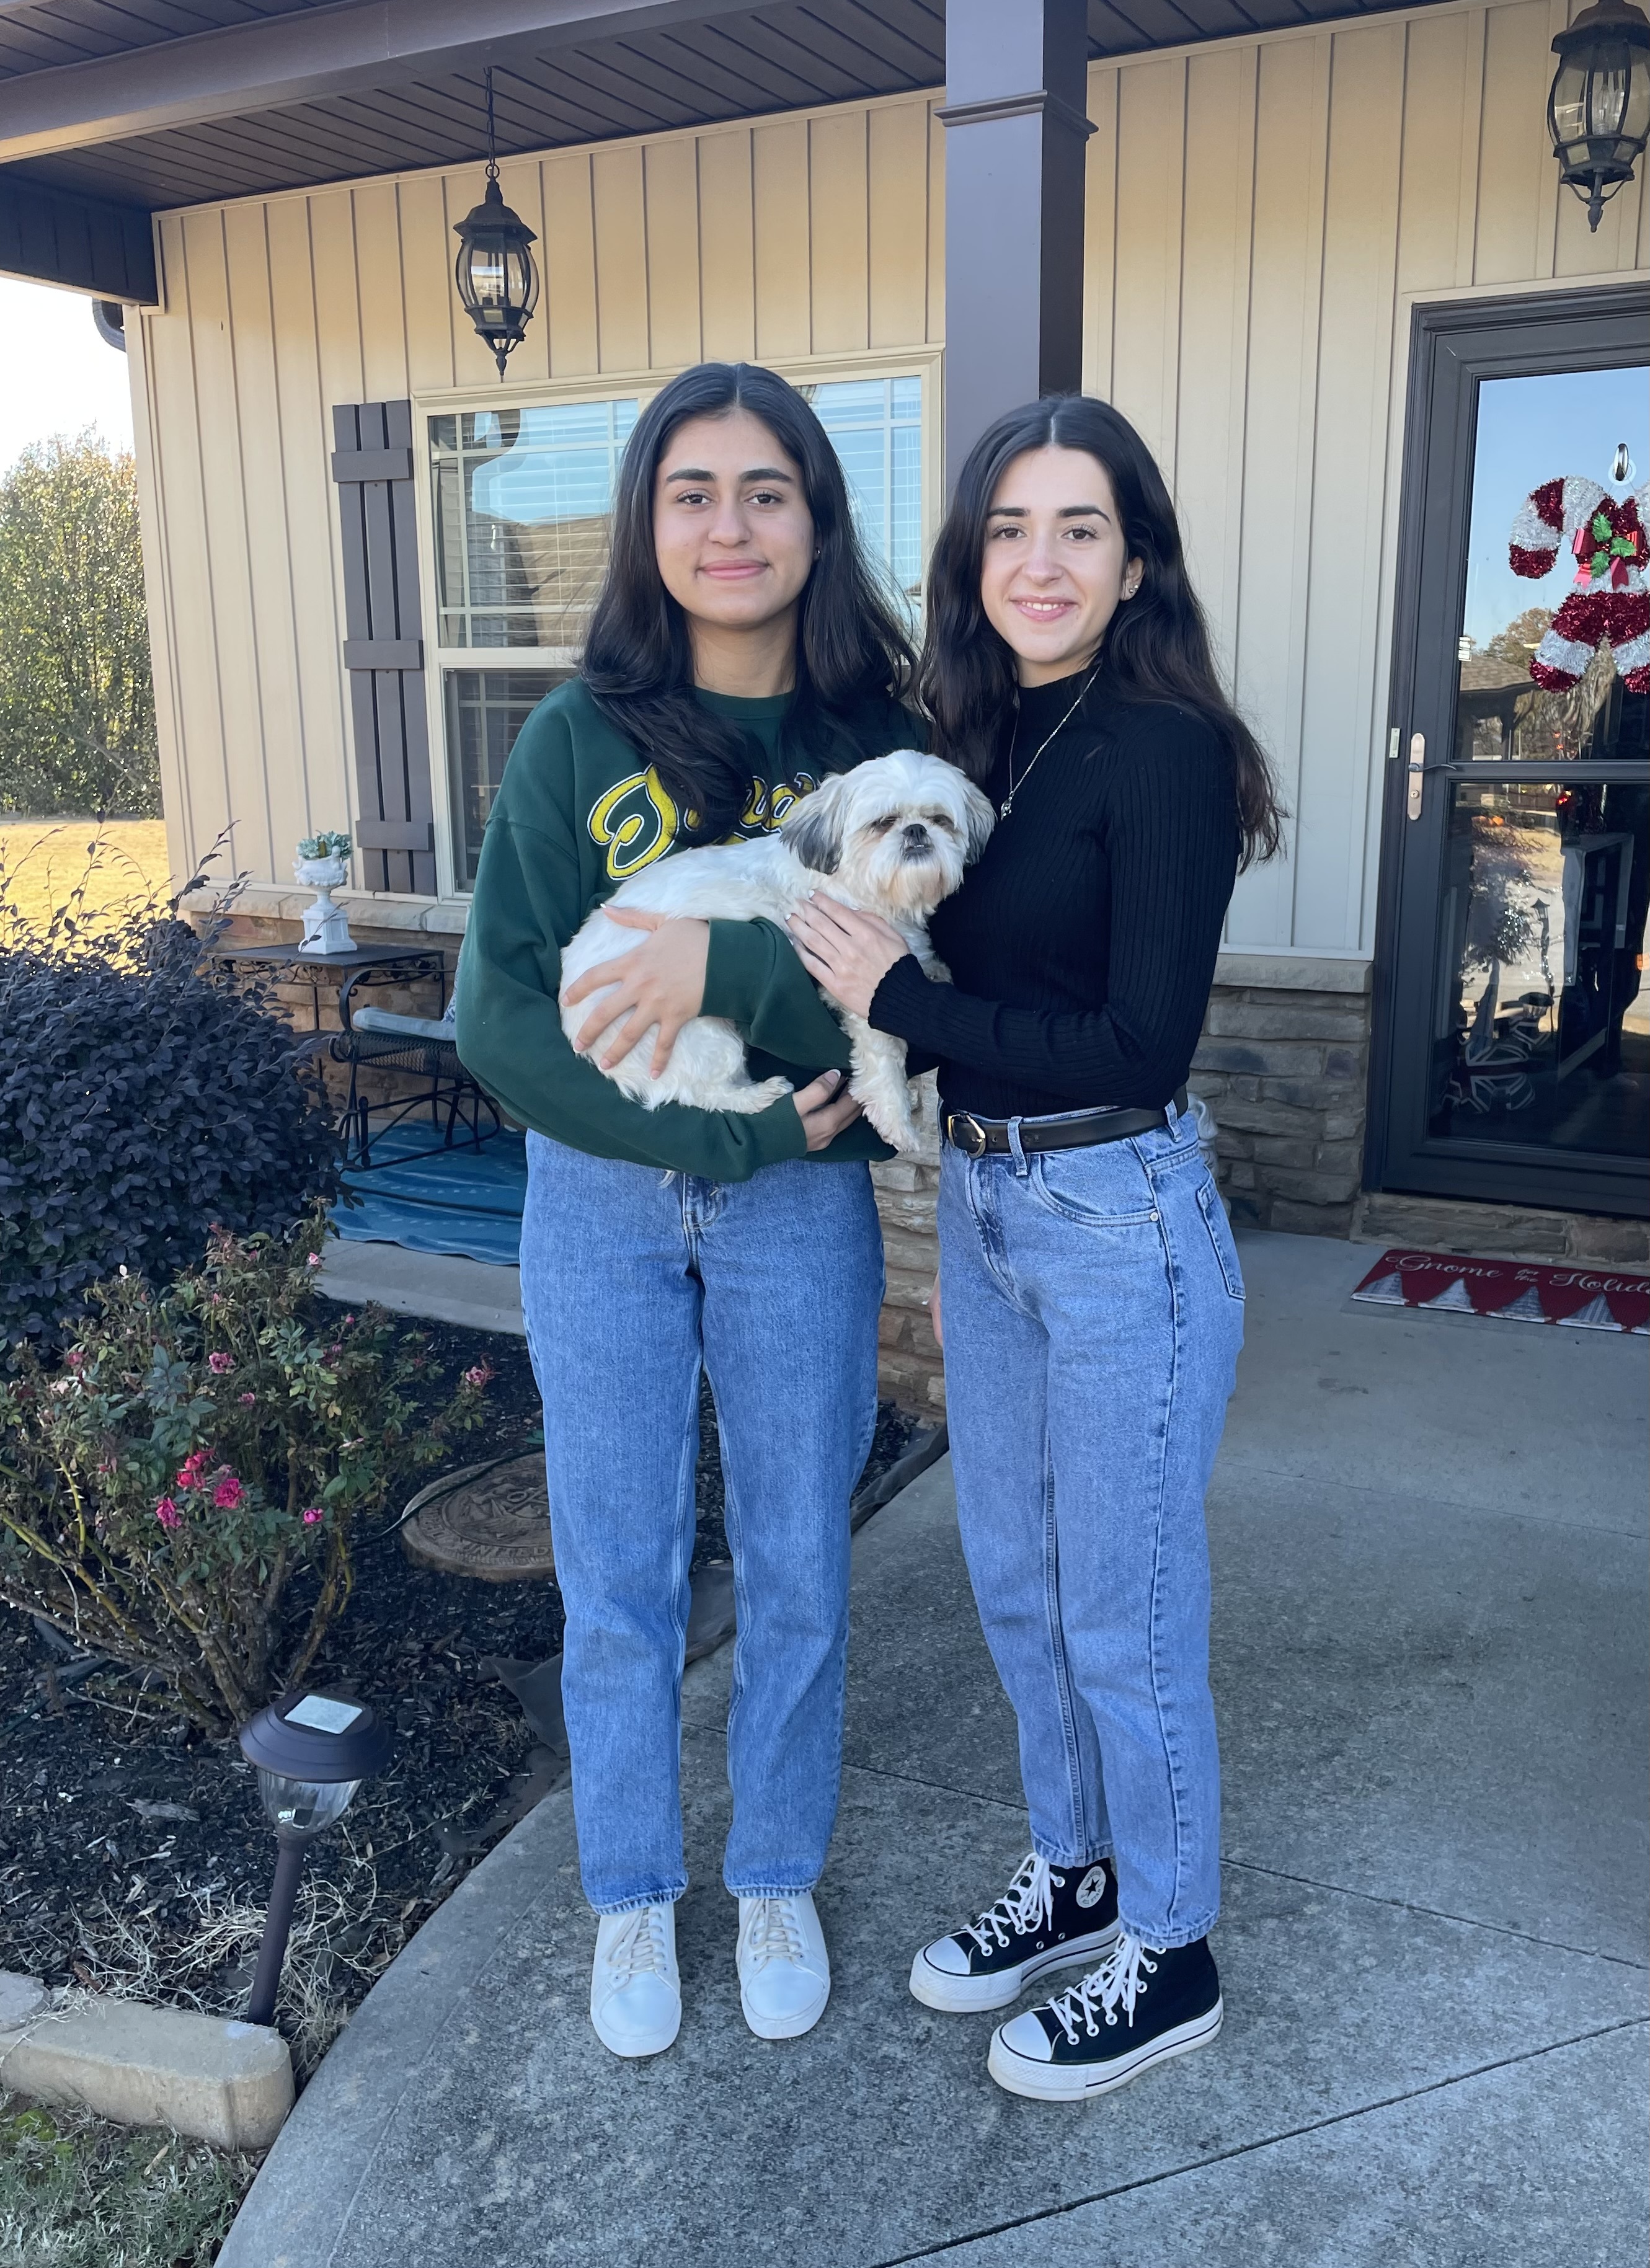 Two girls smiling holding a dog